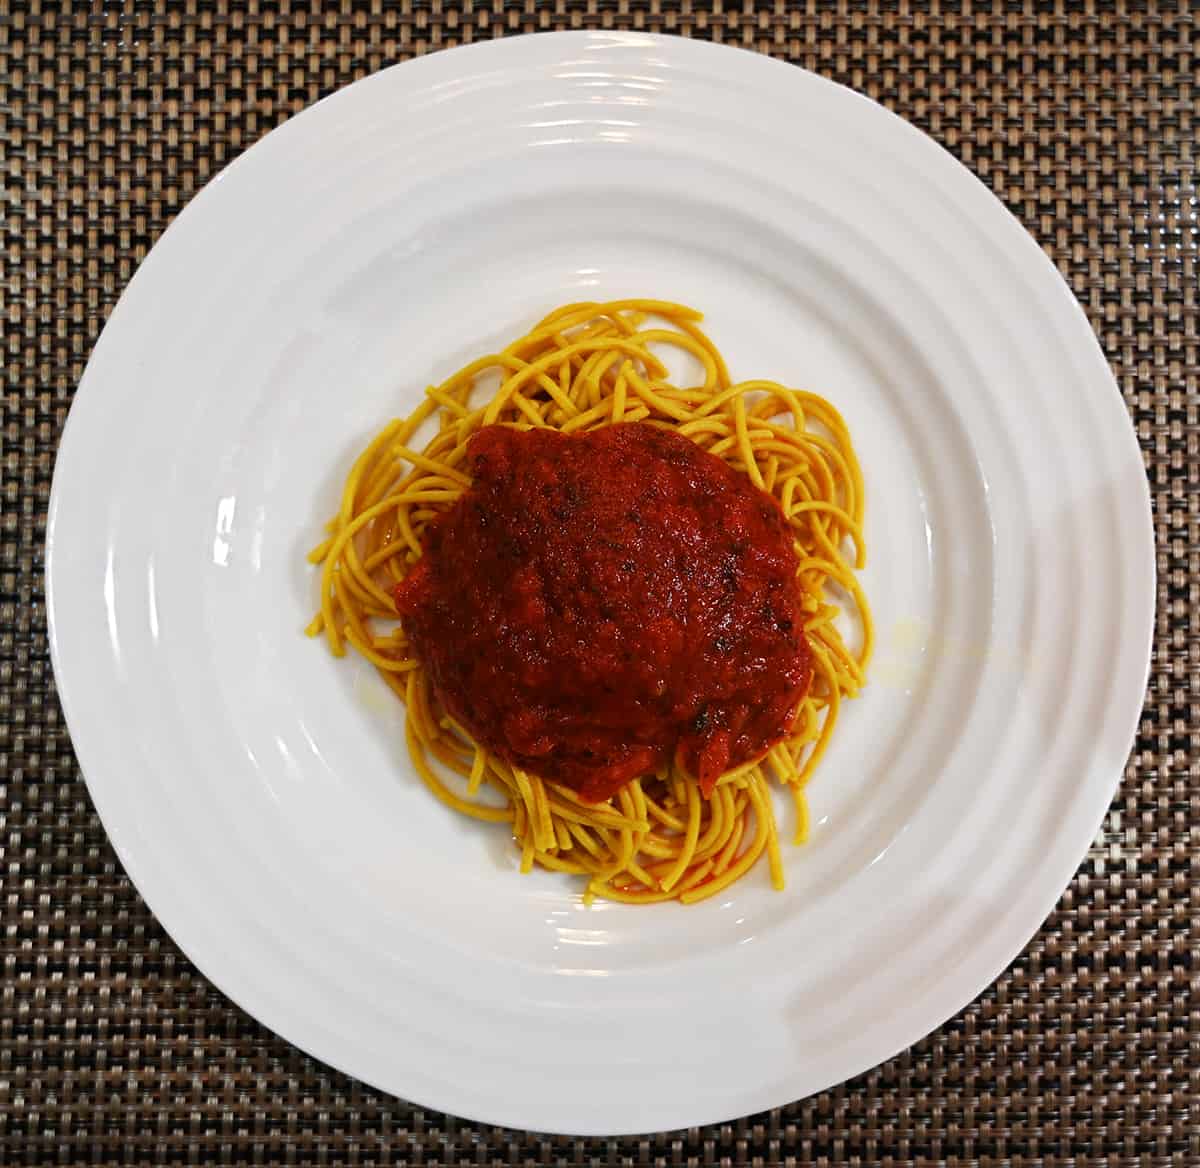 Top down image of the prepared spagehtti with a red meat sauce served on a white plate.